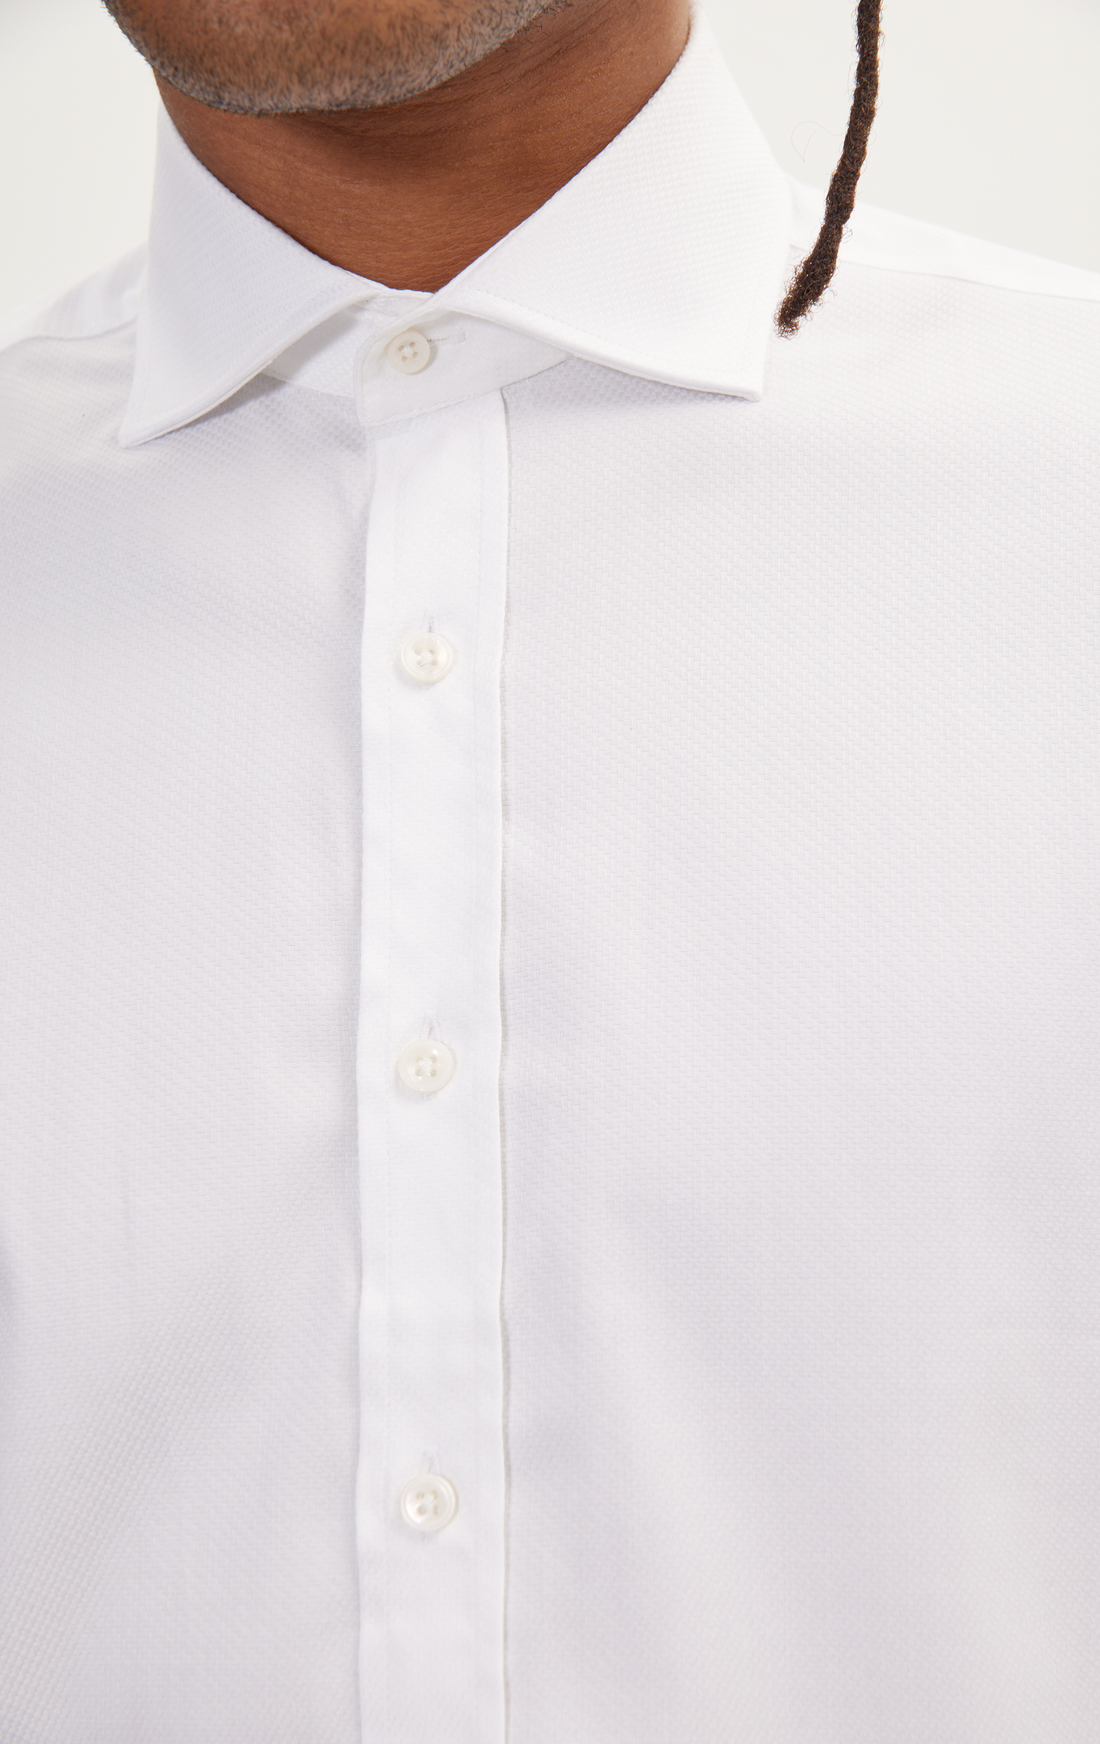 N° 4802A PURE COTTON FRONT PLACKET SPREAD COLLAR DRESS SHIRT - WHITE